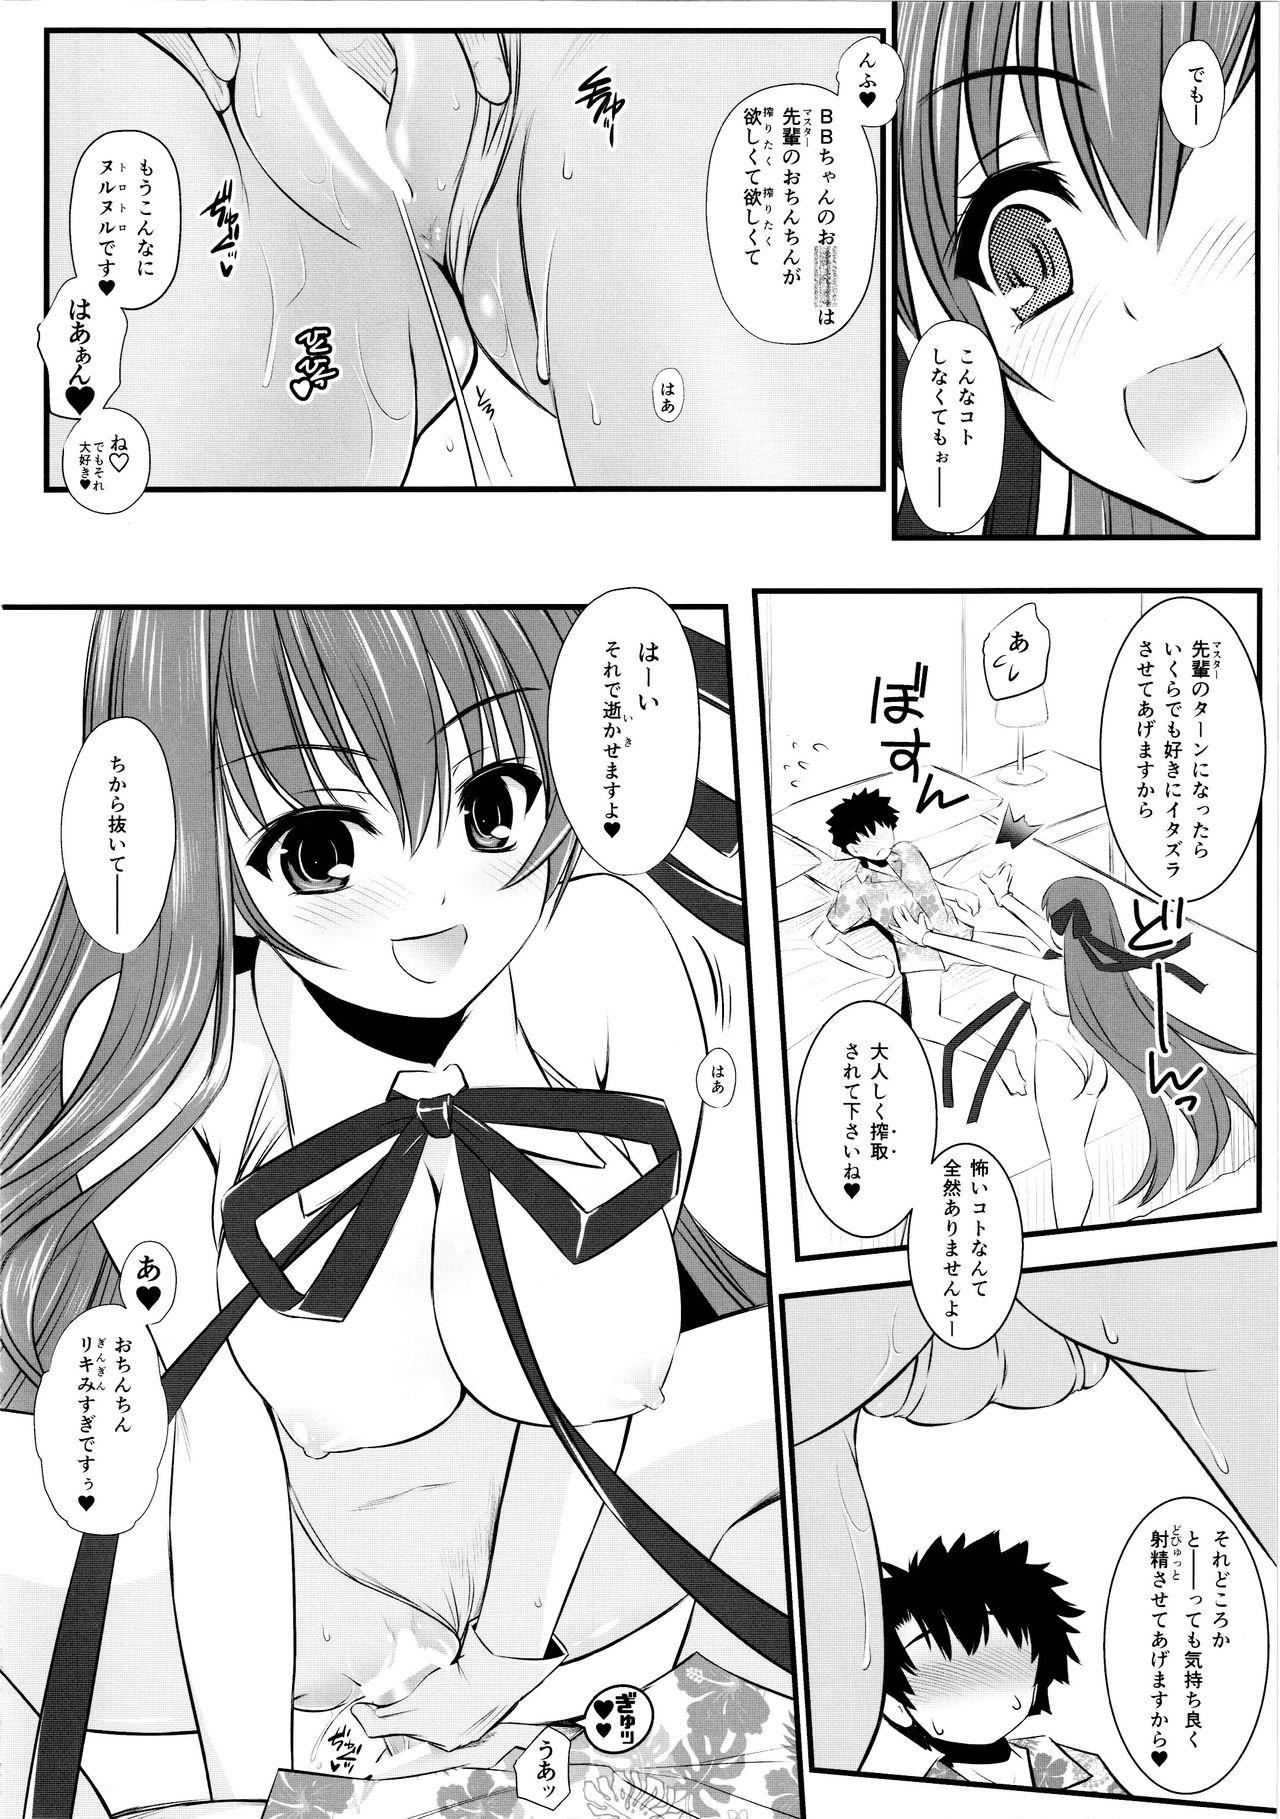 Fodendo (C96) [Yakan Honpo (Inoue Tommy)] Queen [Kyuuin] BB-chan (Fate/Grand Order) - Fate grand order Body Massage - Page 8